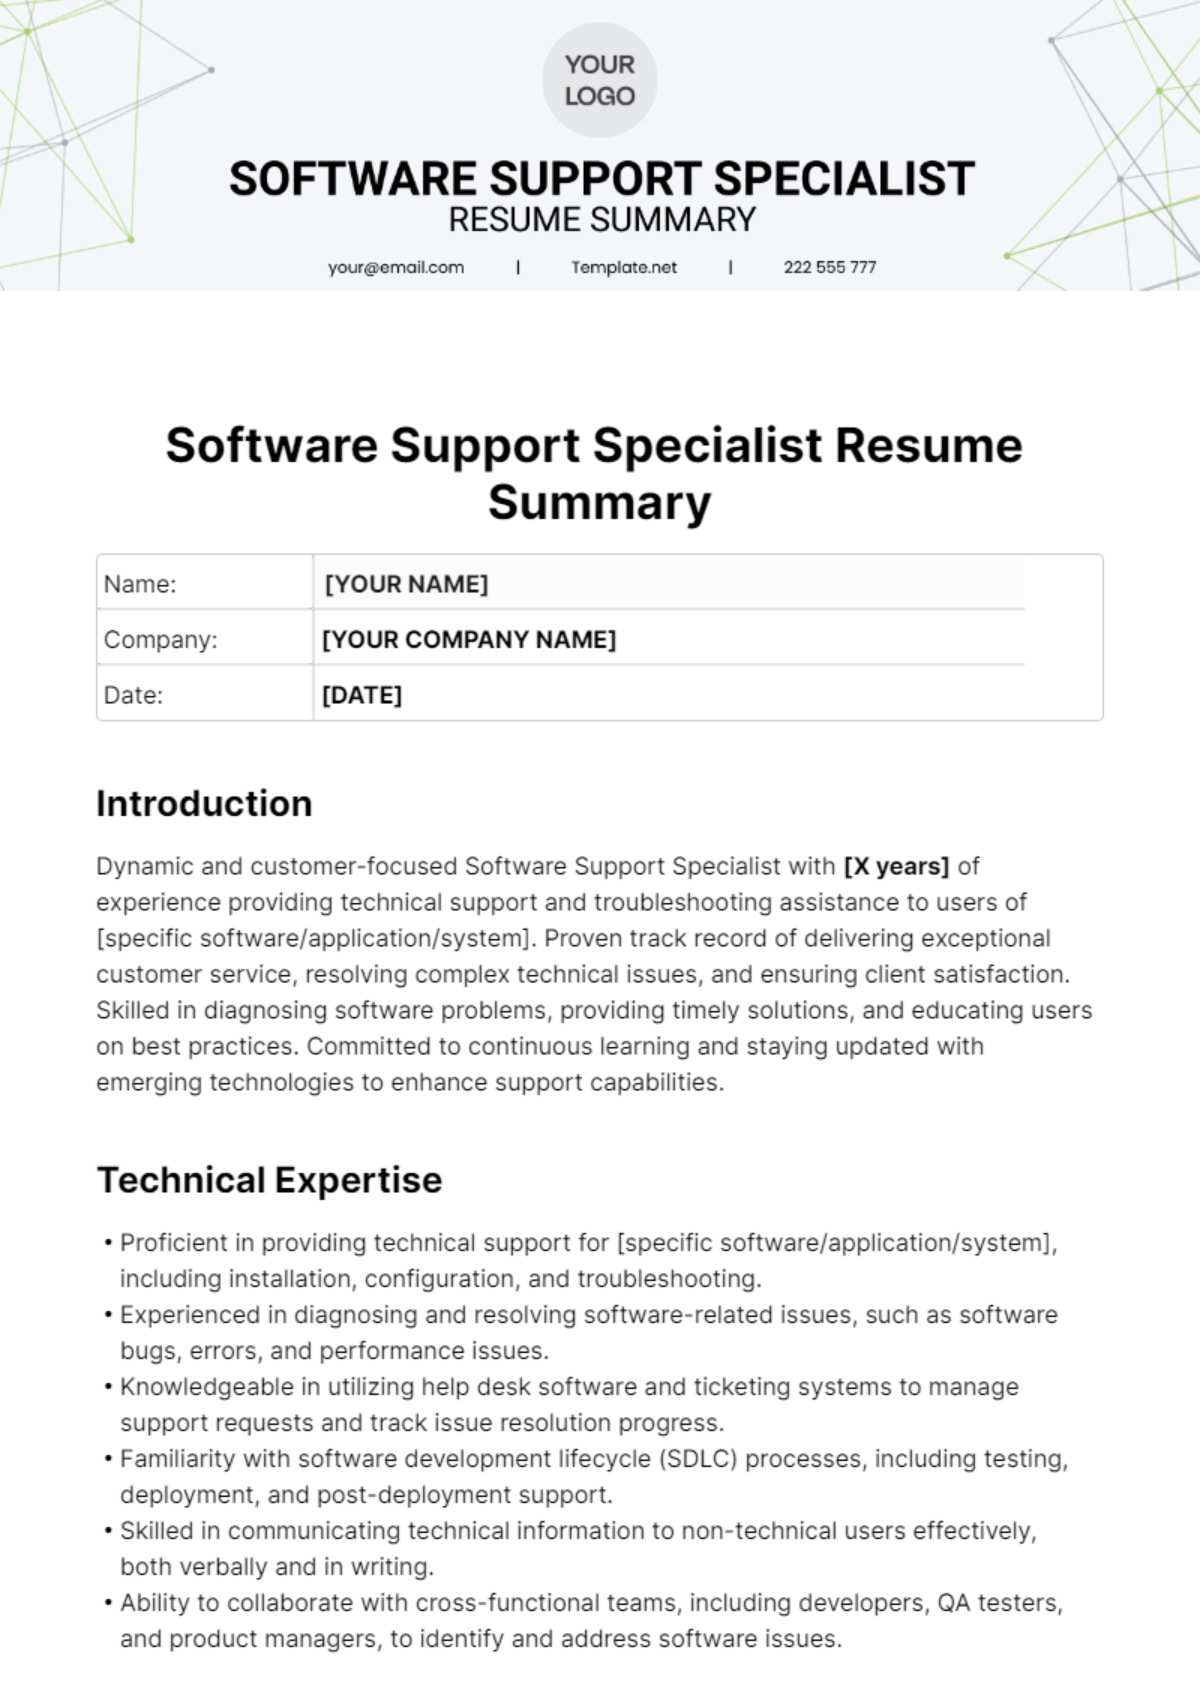 Free Software Support Specialist Resume Summary Template 